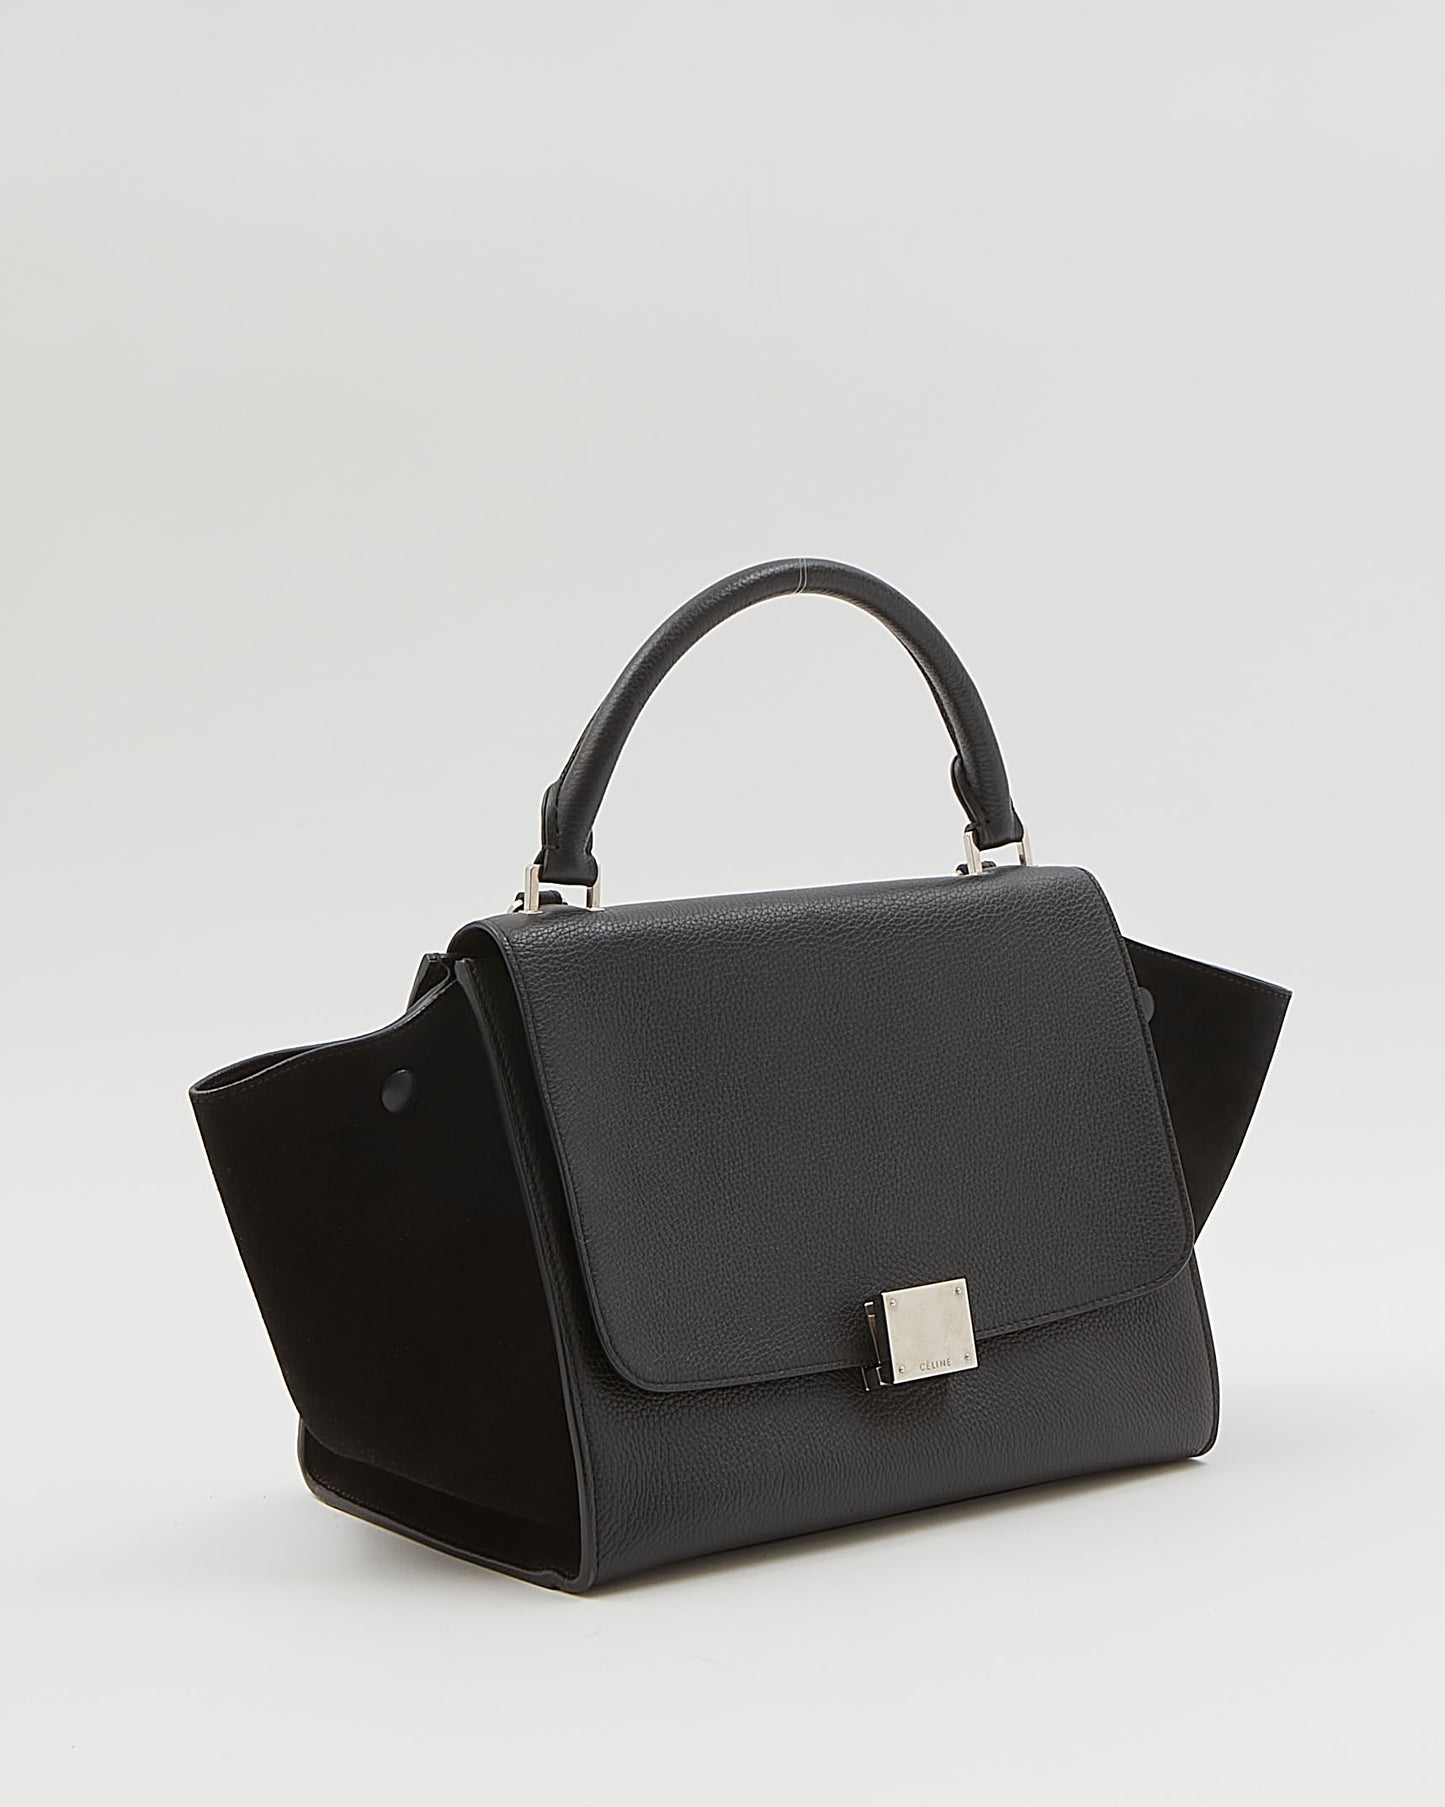 Celine Black Leather & Suede Small Trapeze Bag